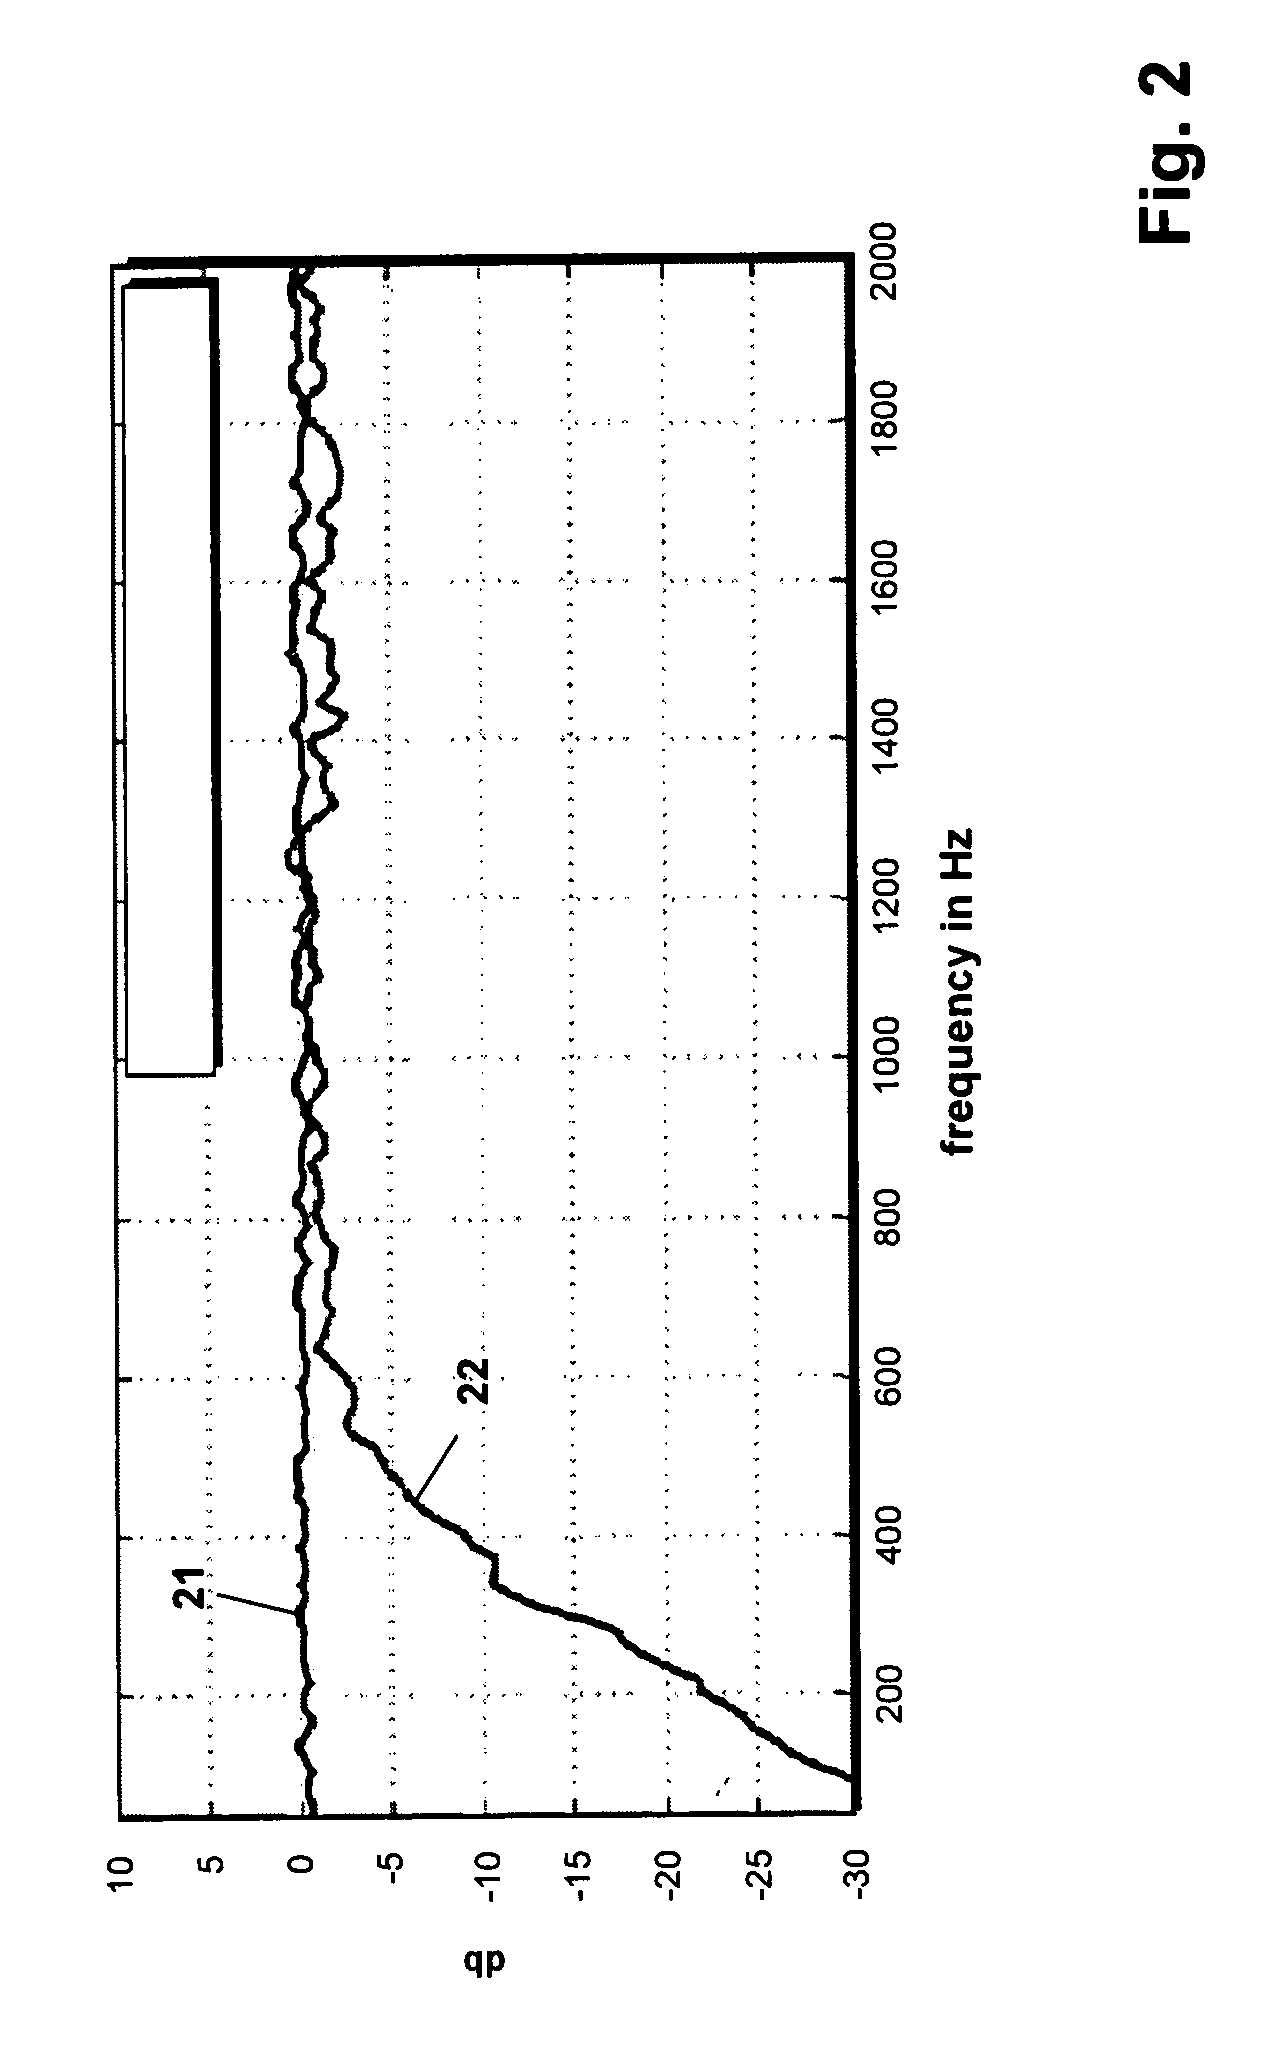 System and method for extending spectral bandwidth of an audio signal